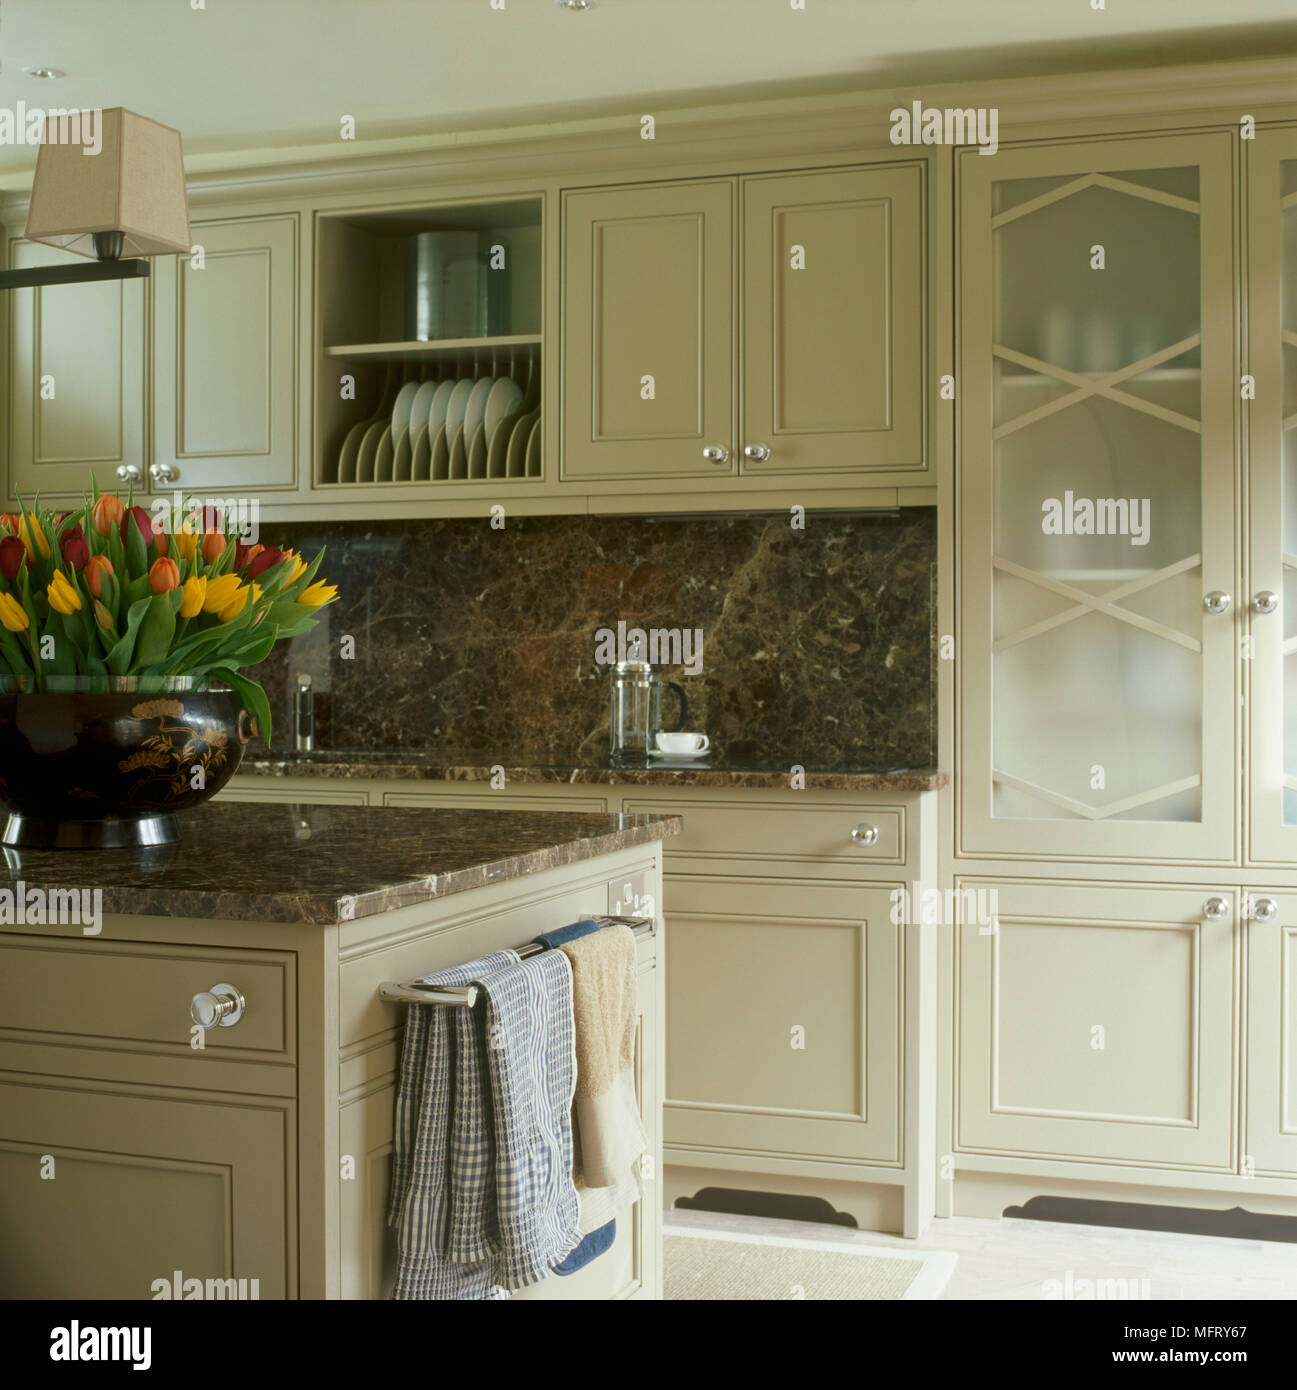 A detail of a modern kitchen painted units granite work tops and splash back glass fronted cabinets Stock Photo